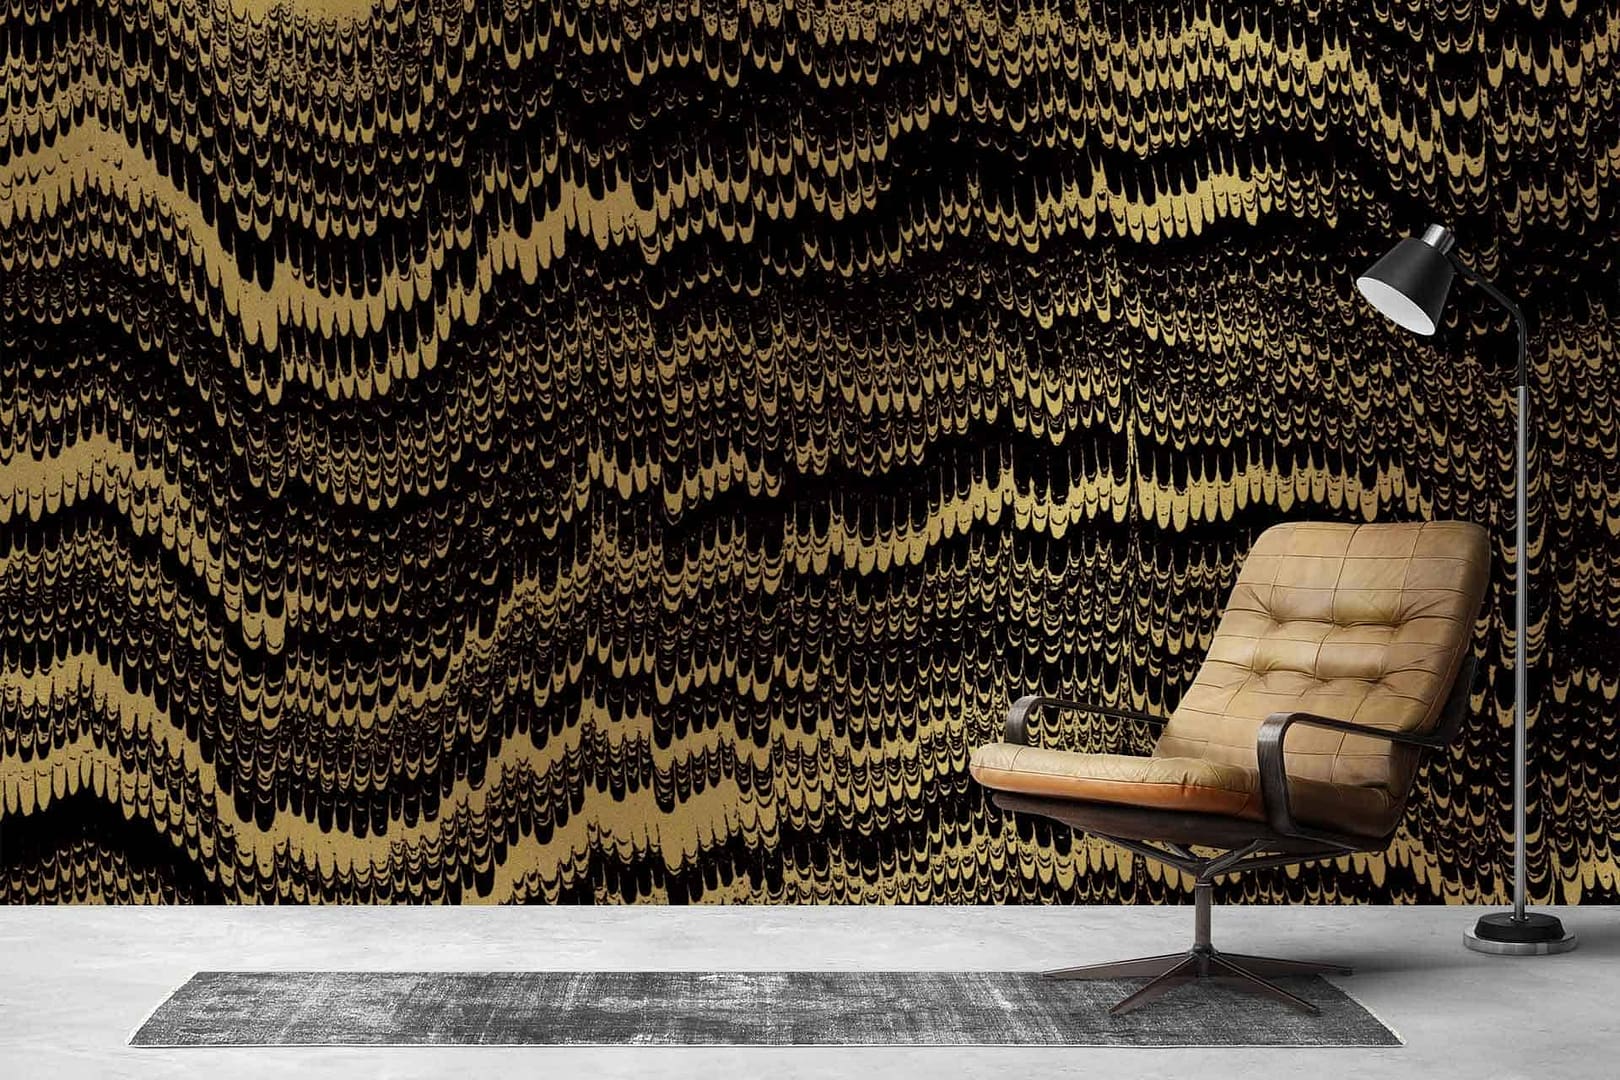 Prospecting - a wallpaper made up of gold and black textured pattern by Cara Saven Wall Design